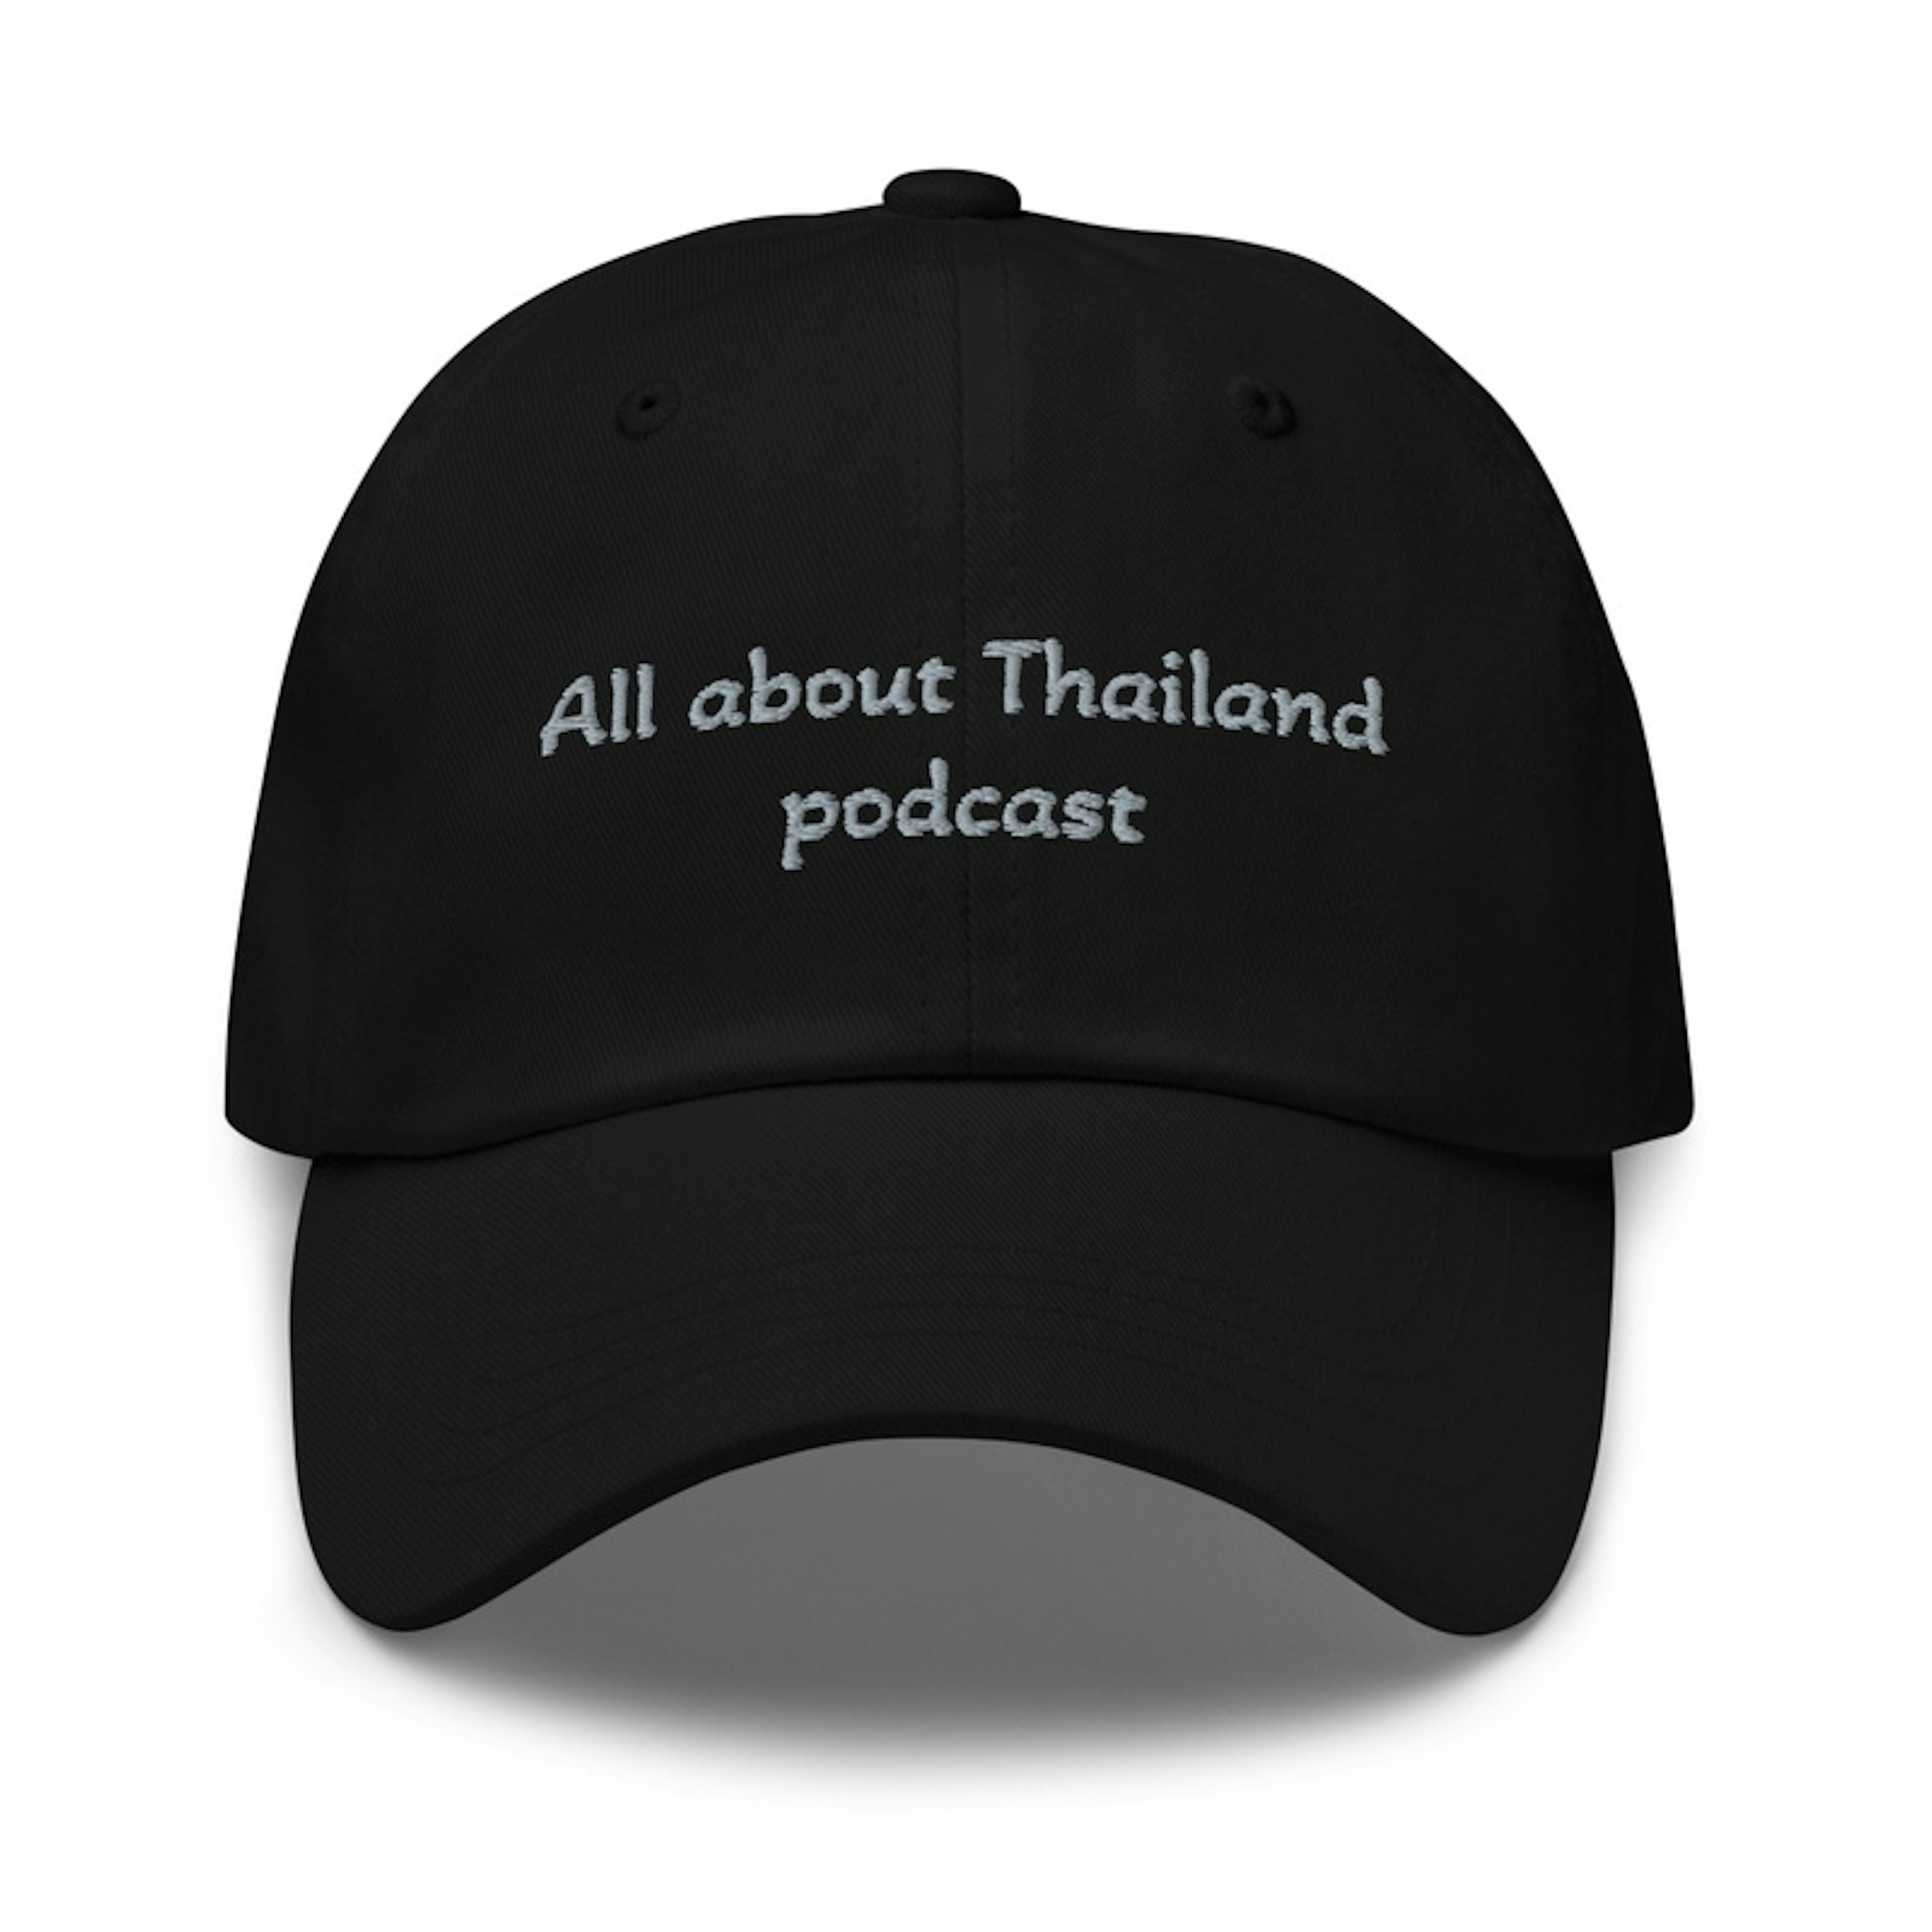 All about Thailand Podcast